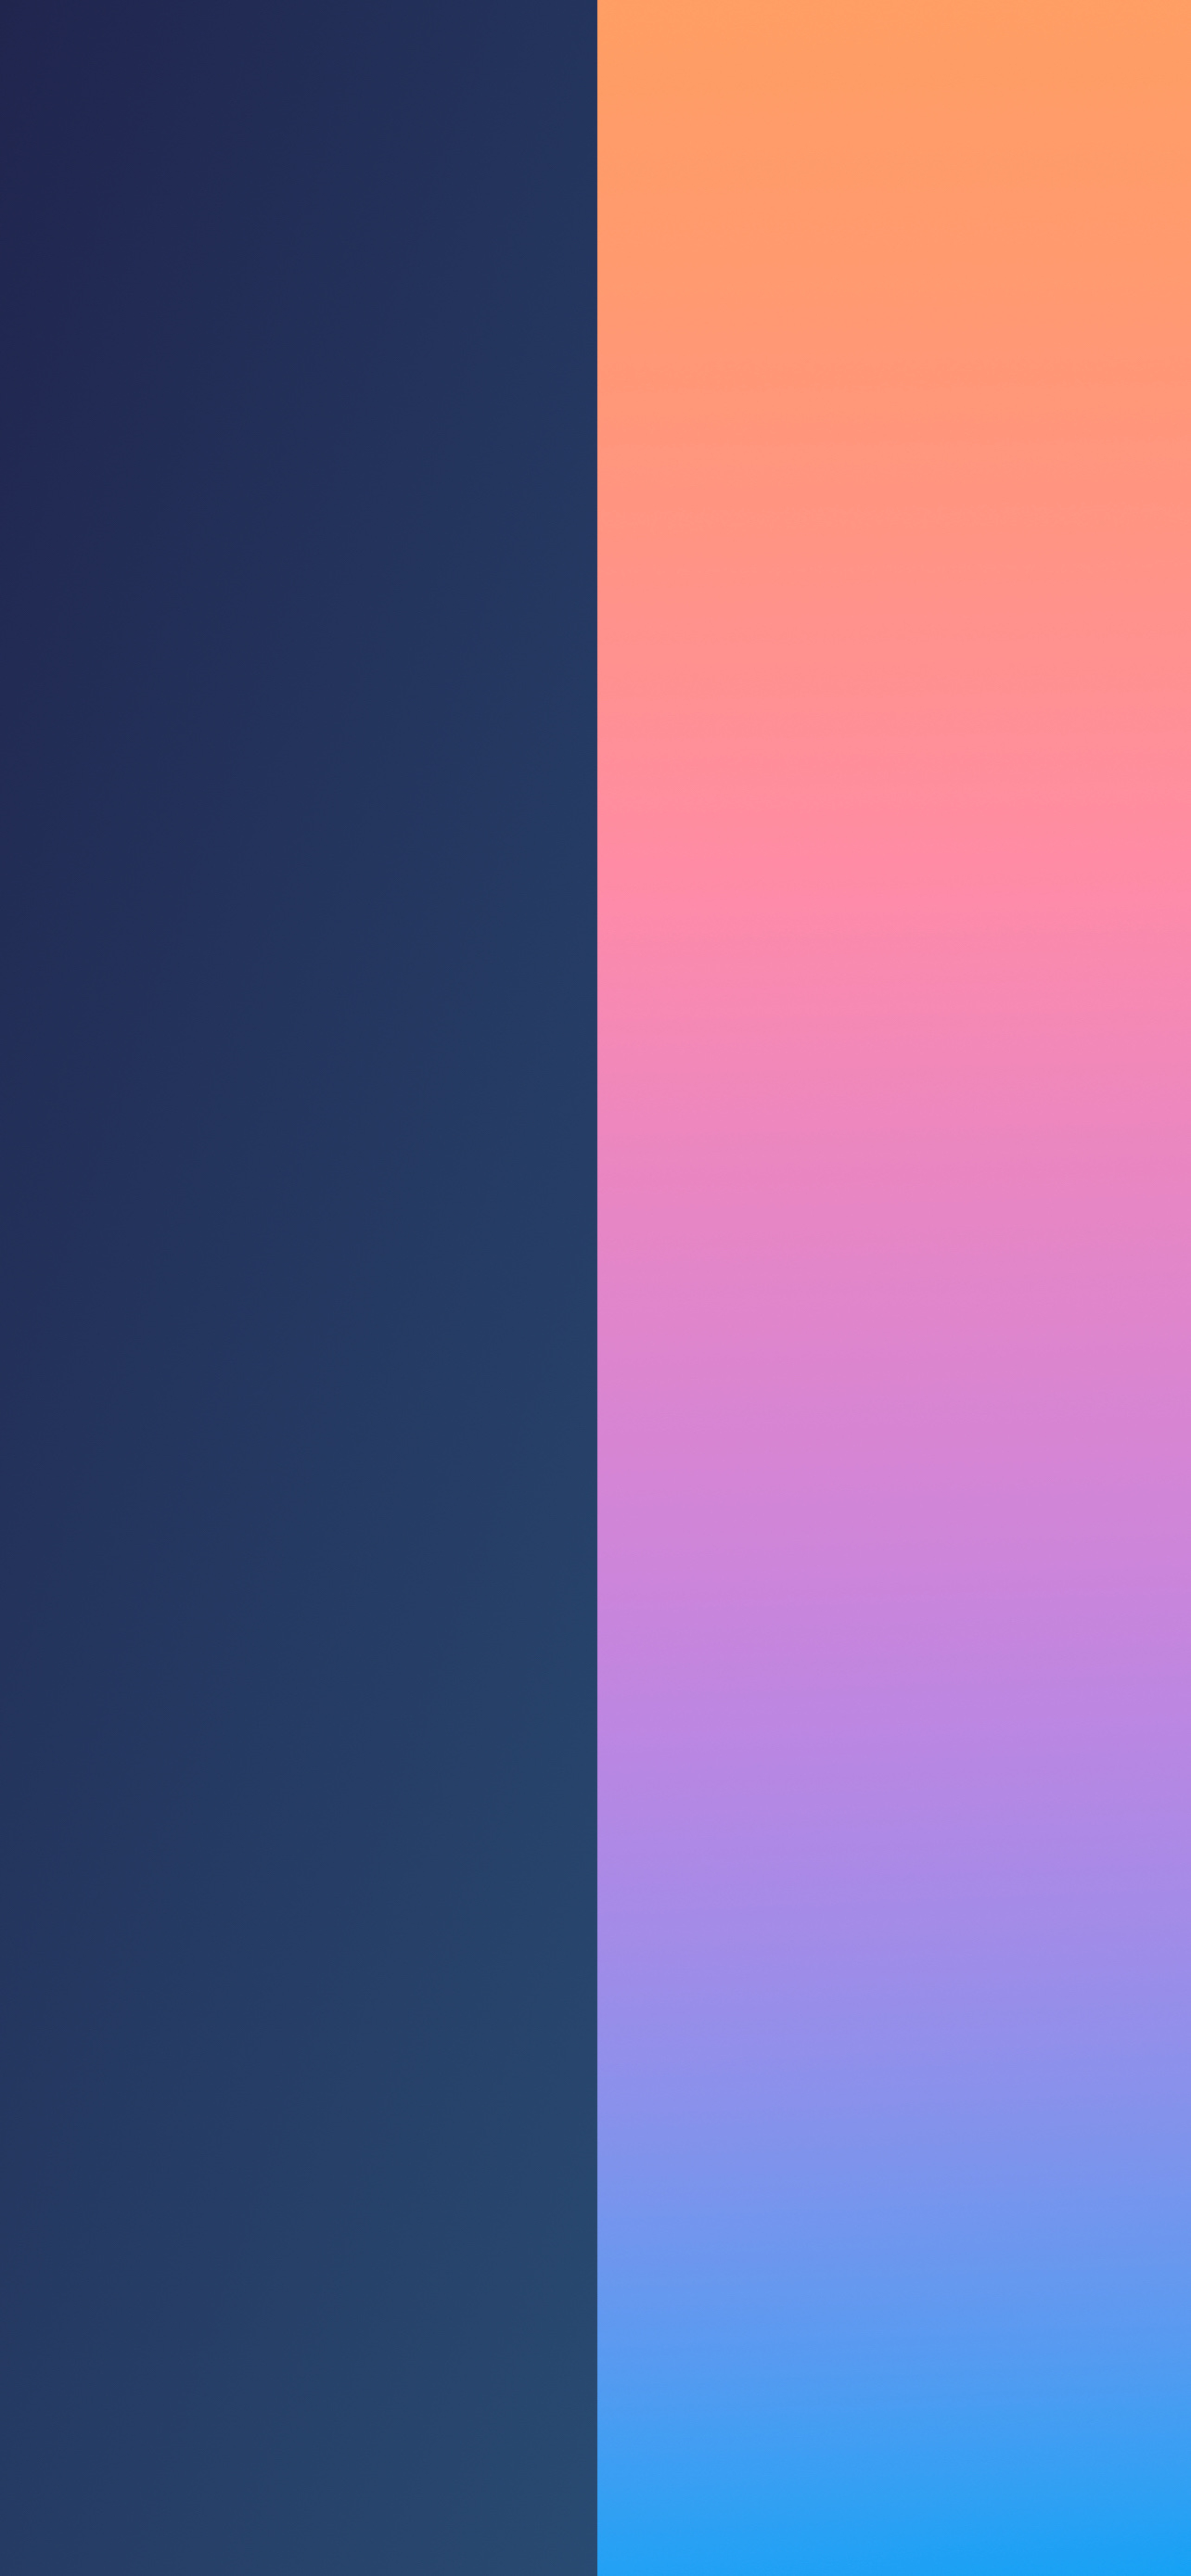 1284x2778 Duo iPhone wallpapers with split colors